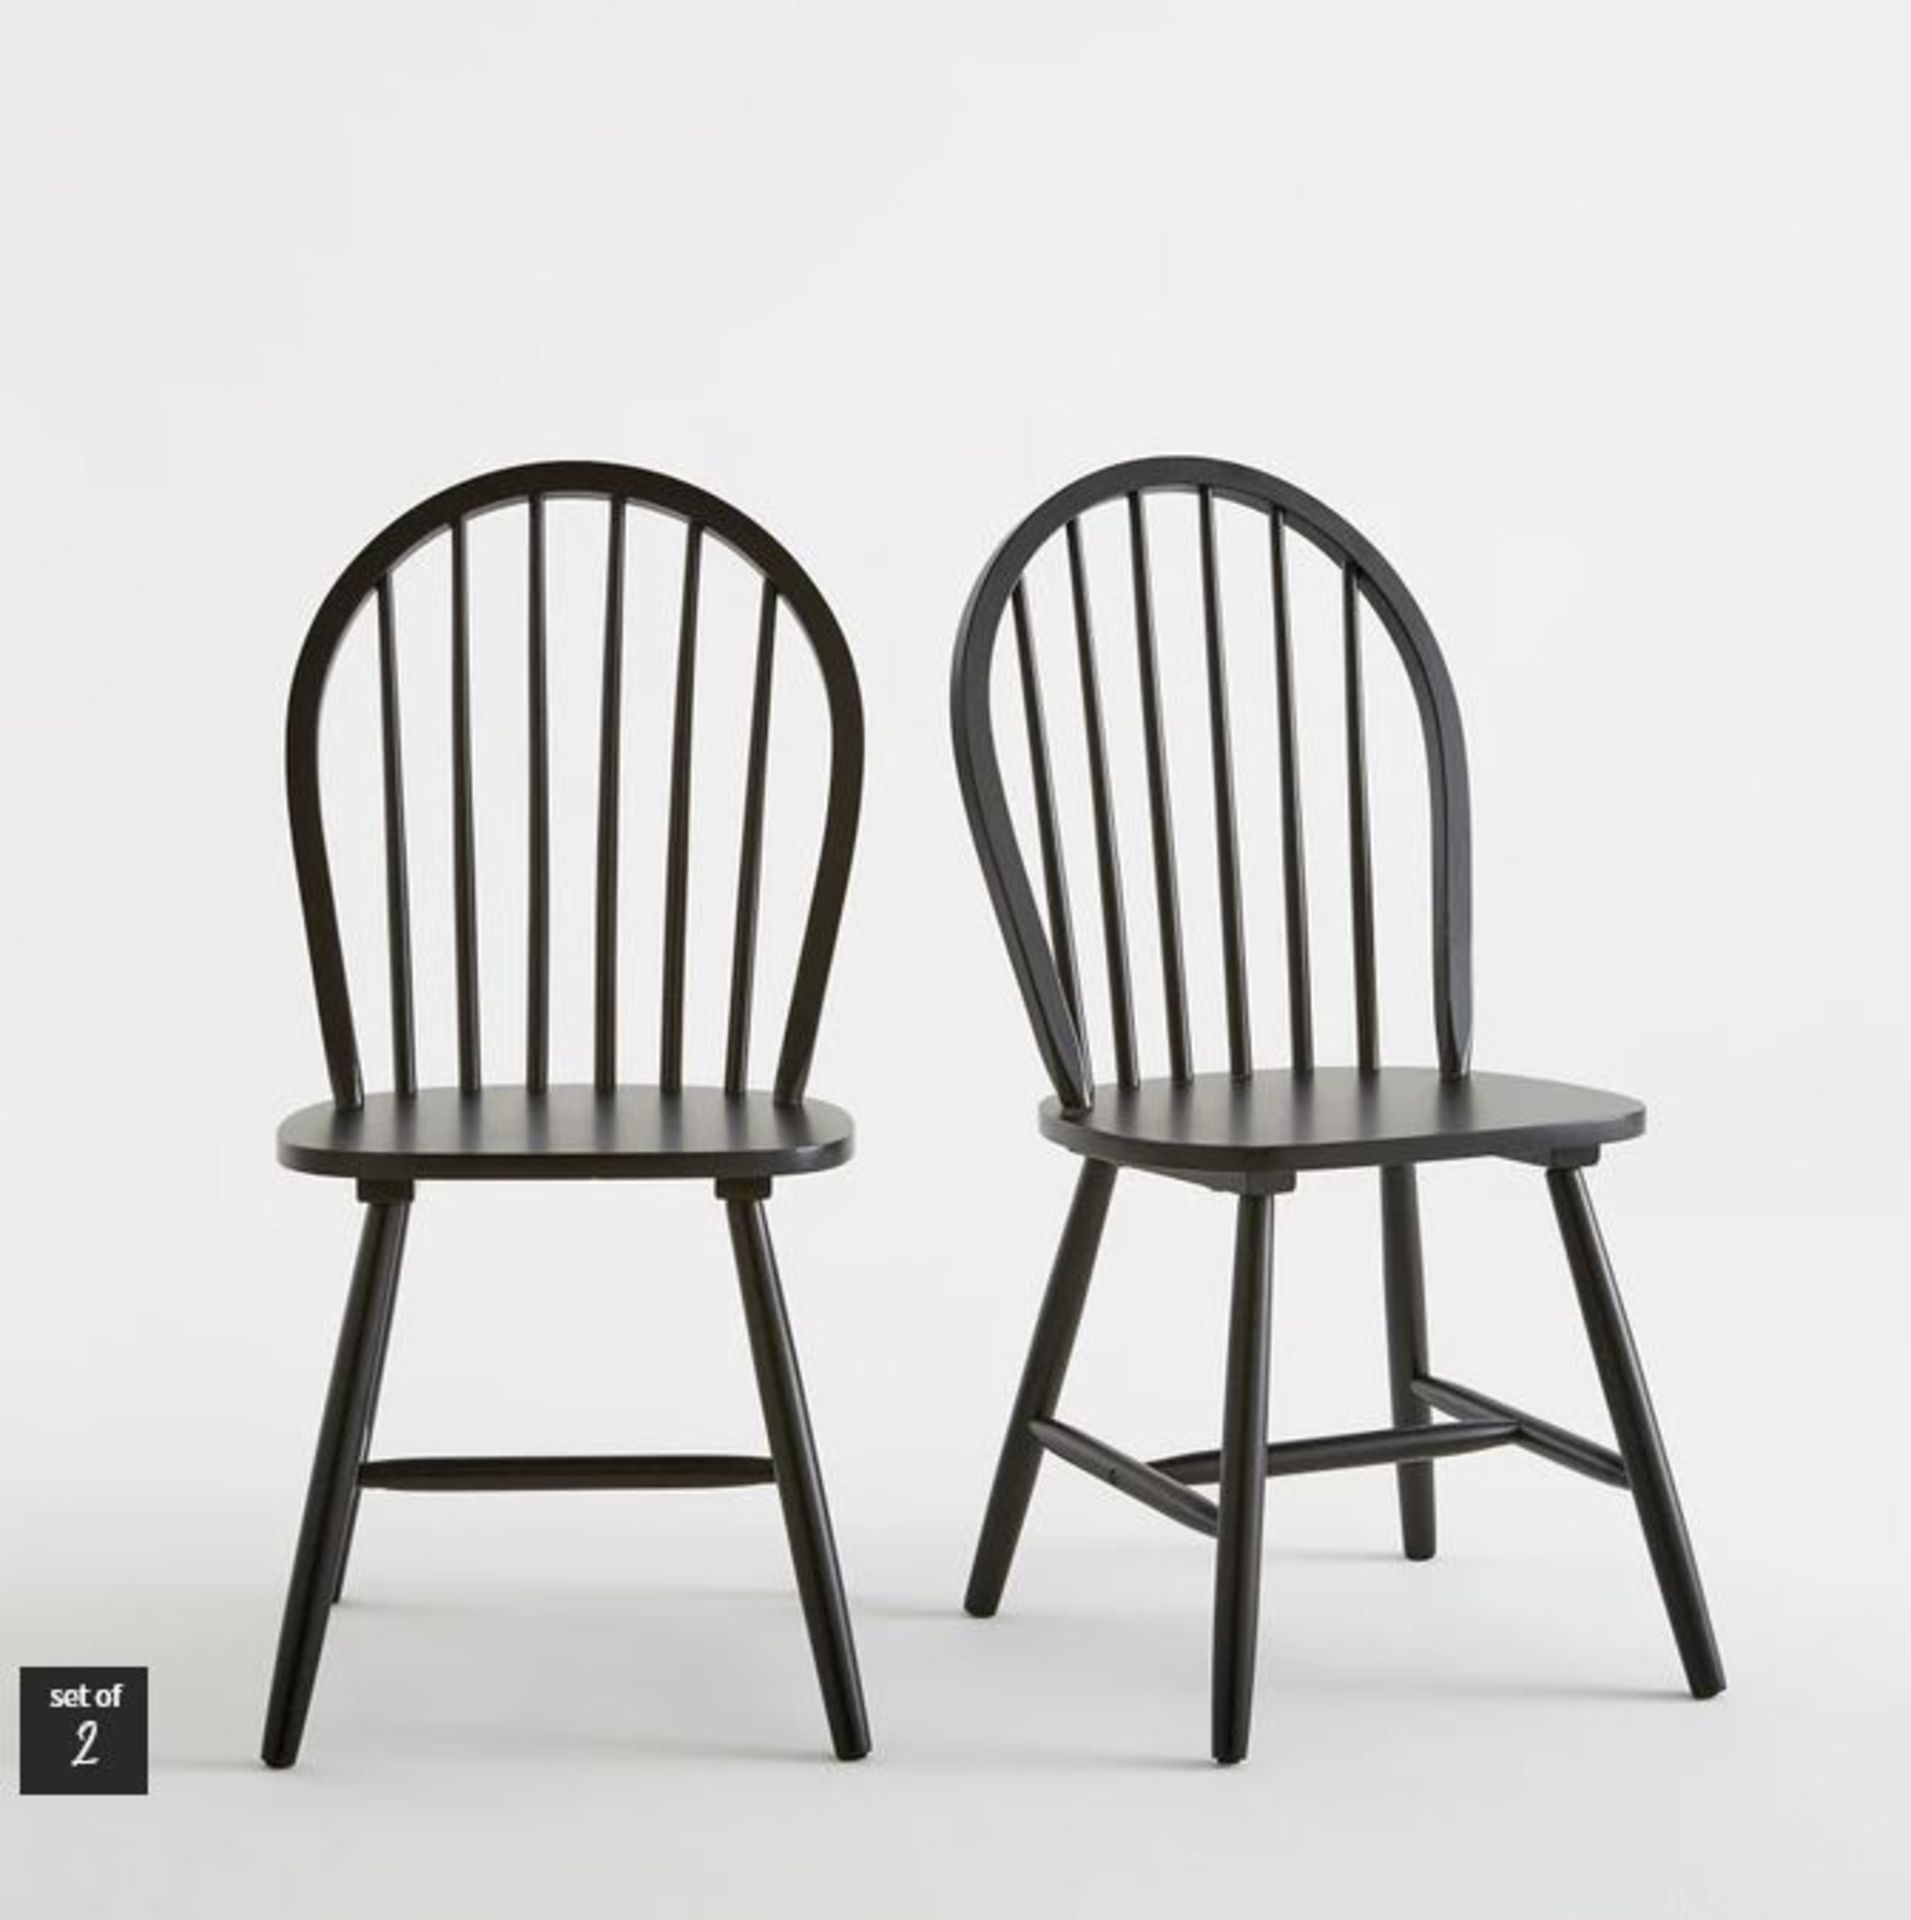 LA REDOUTE WINDSOR SOLID BEECH CHAIRS (SET OF 2)